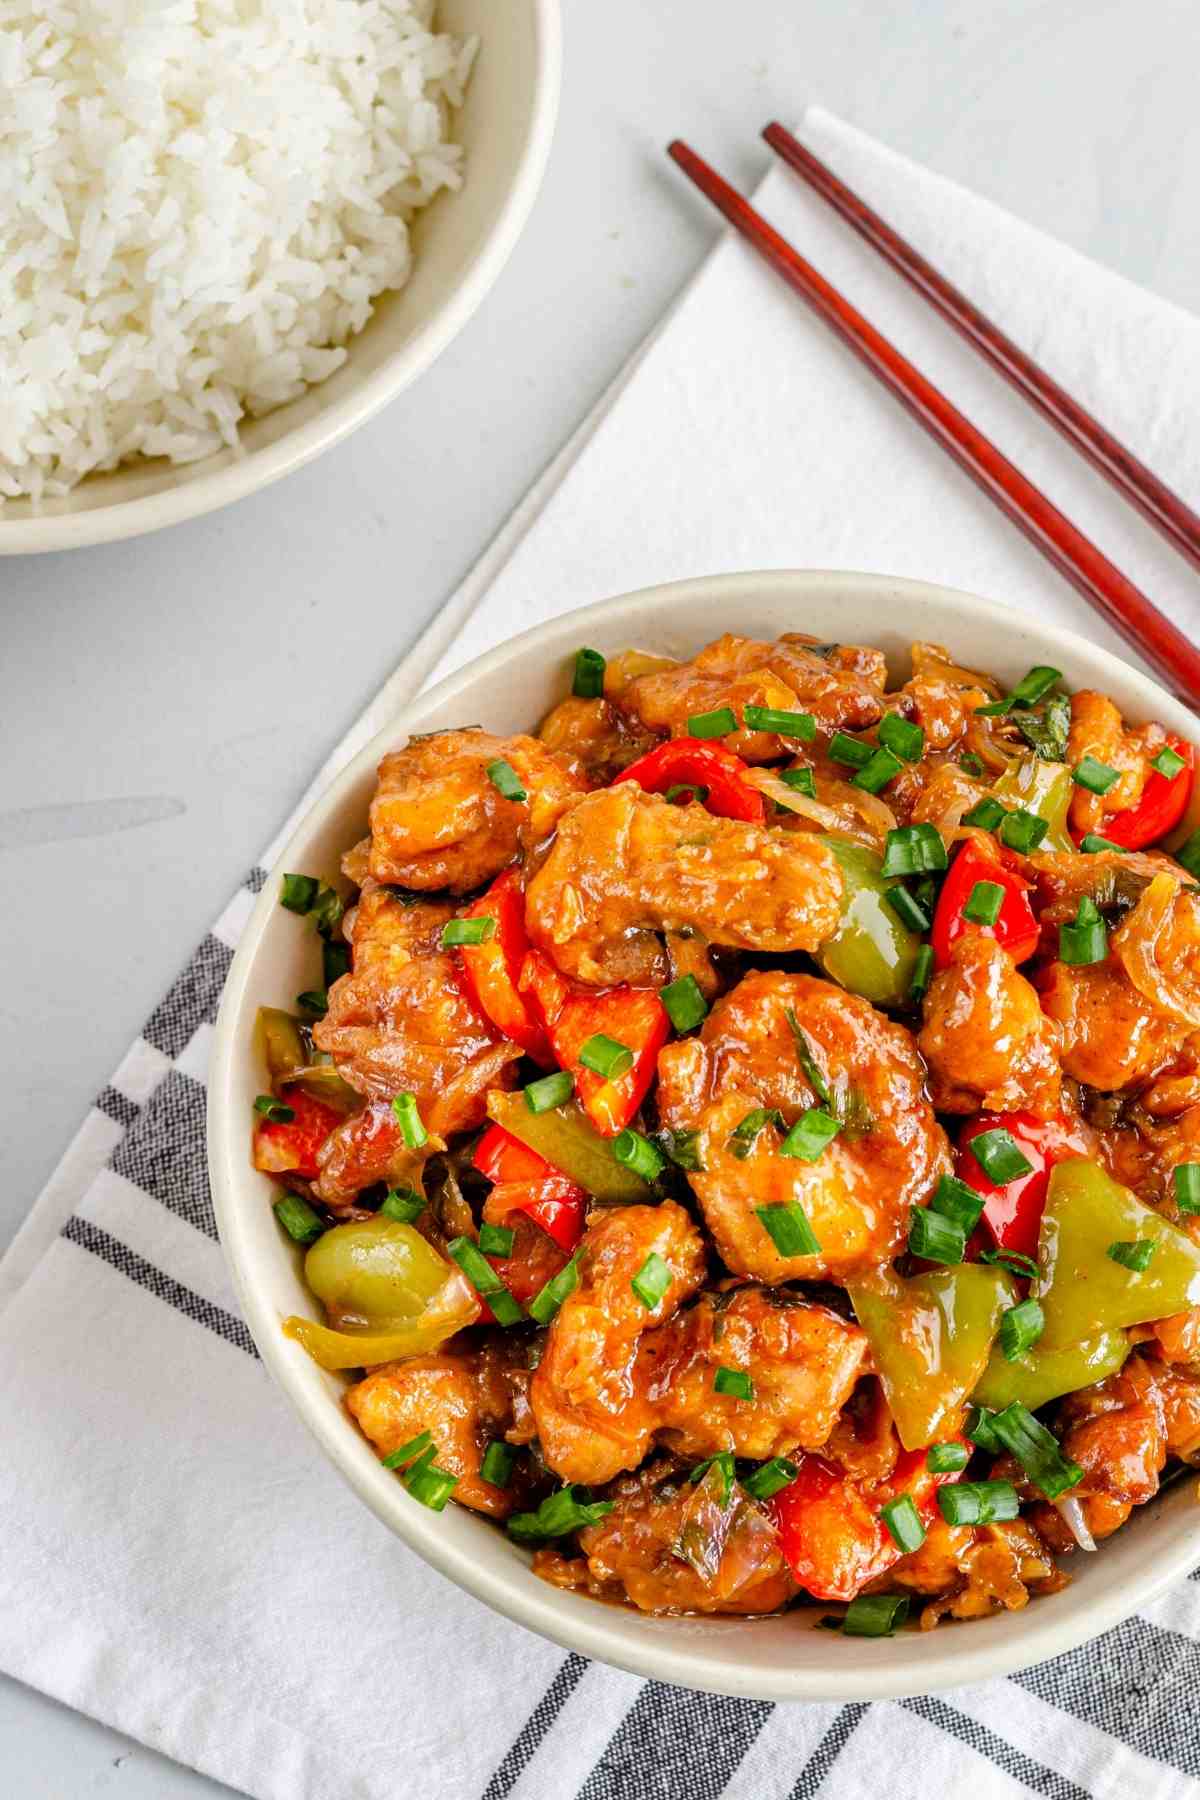 Loaded with mouthwatering flavor, this Chinese chicken is so easy to make that you will hardly believe it. Yes, you can make a tasty and healthy dish even on a busy weeknight.